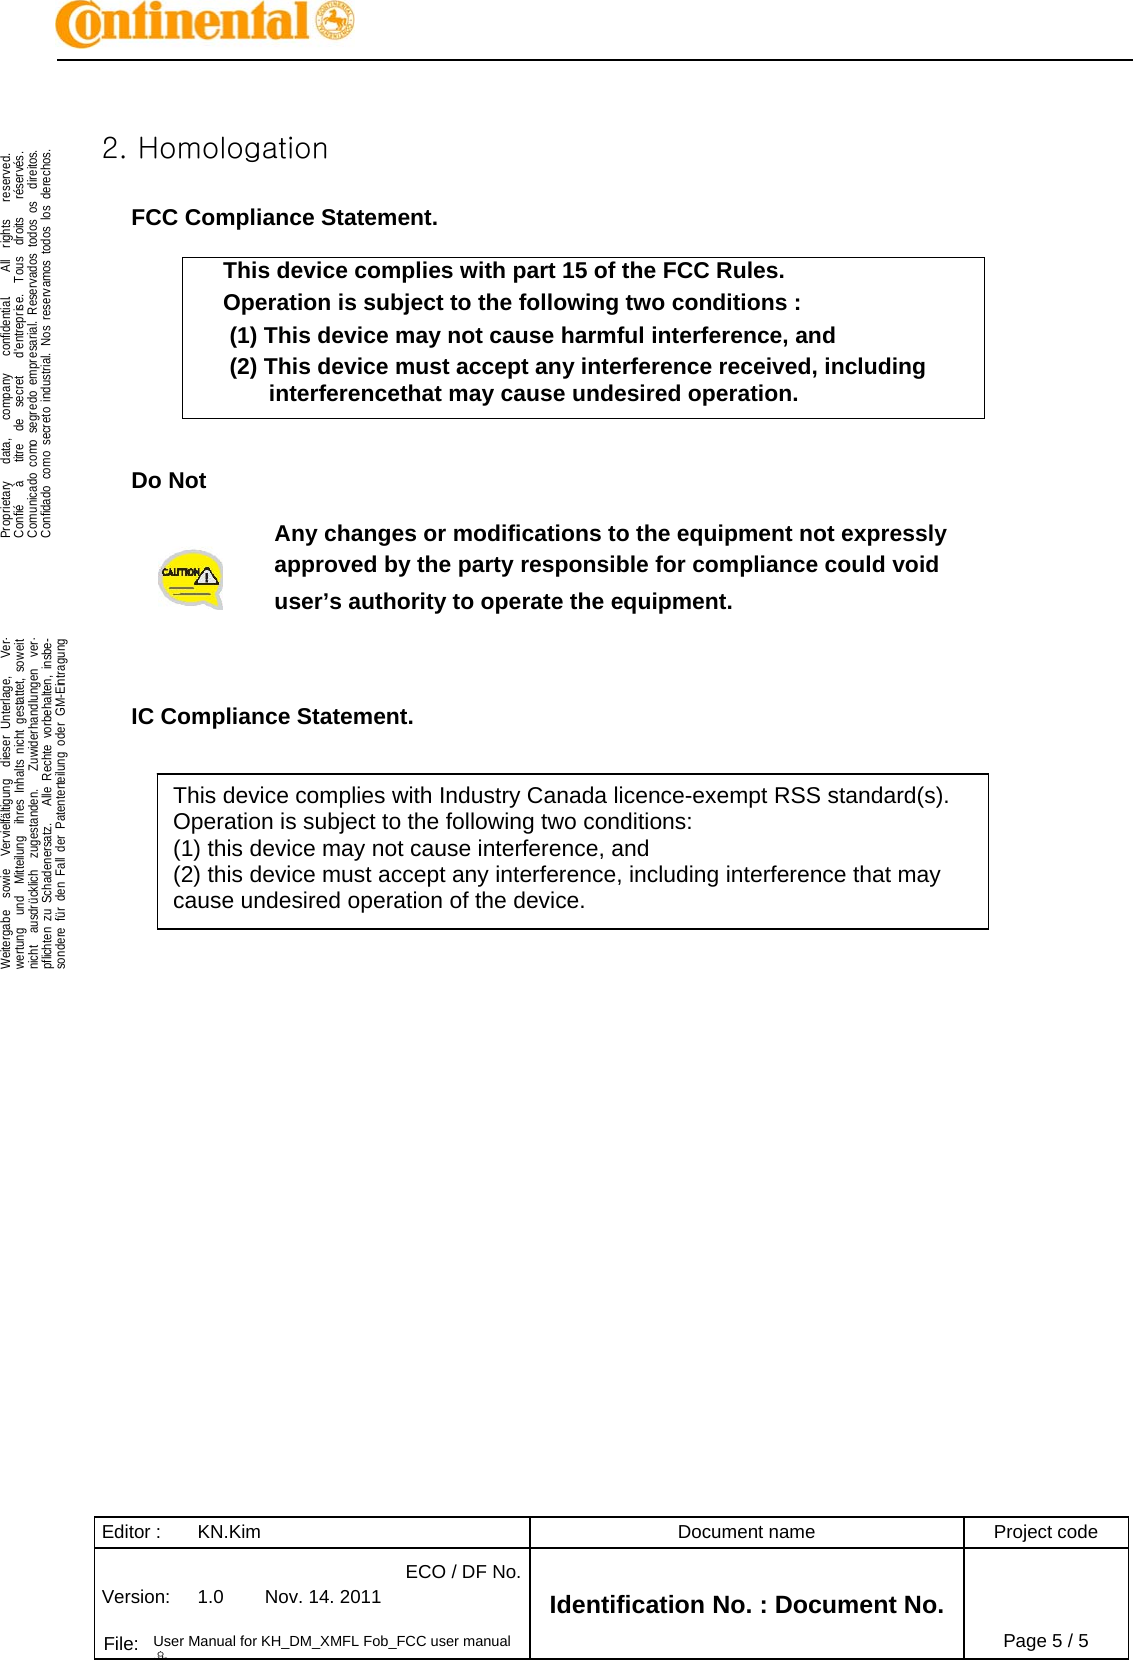 Editor :  KN.Kim  Document name  Project code Version:  1.0  Nov. 14. 2011 ECO / DF No.Identification No. : Document No.   File:  User Manual for KH_DM_XMFL Fob_FCC user manual 용Page 5 / 5    .Proprietary   data,   company   confidential.    All  rights   reserved.Confié   à   titre  de  secret   d&apos;entreprise.  Tous  droits   réservés.Comunicado como segredo empresarial. Reservados todos os  direitos.Confidado como secreto industrial. Nos reservamos todos los derechos.  .Weitergabe  sowie  Vervielfältigung  dieser Unterlage,   Ver-wertung  und  Mitteilung  ihres Inhalts nicht gestattet, soweitnicht  ausdrücklich  zugestanden.   Zuwiderhandlungen  ver-pflichten zu Schadenersatz.   Alle Rechte vorbehalten, insbe-sondere für den Fall der Patenterteilung oder GM-Eintragung   2. Homologation  FCC Compliance Statement.  This device complies with part 15 of the FCC Rules. Operation is subject to the following two conditions :  (1) This device may not cause harmful interference, and  (2) This device must accept any interference received, including interferencethat may cause undesired operation.   Do Not   Any changes or modifications to the equipment not expressly  approved by the party responsible for compliance could void user’s authority to operate the equipment.    IC Compliance Statement.  This device complies with Industry Canada licence-exempt RSS standard(s). Operation is subject to the following two conditions:  (1) this device may not cause interference, and  (2) this device must accept any interference, including interference that may cause undesired operation of the device. 